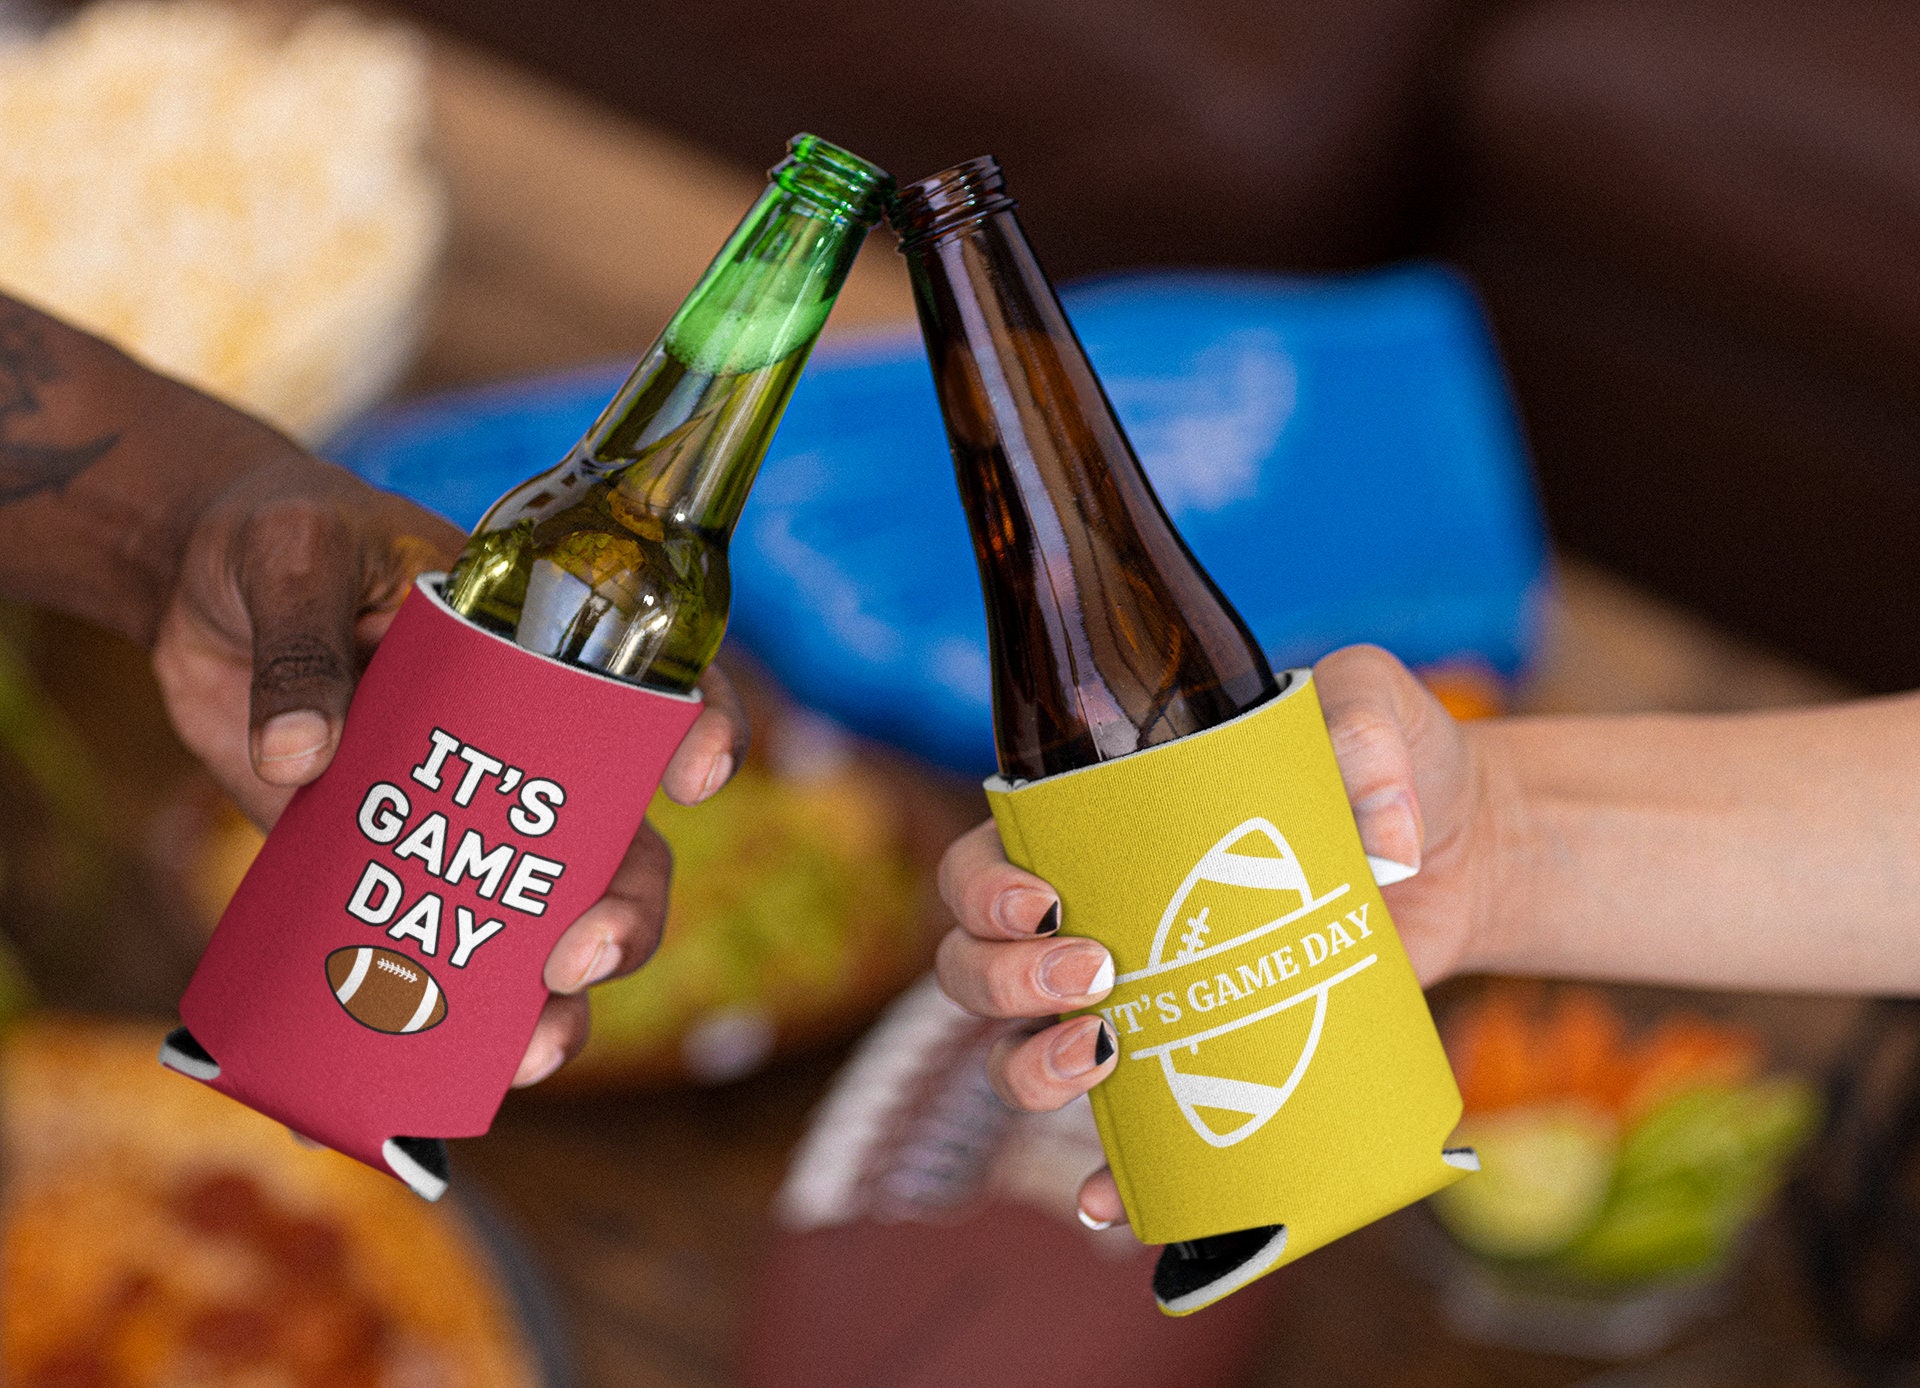 This Universal Drink Koozie is a Texas Tailgate Game Changer